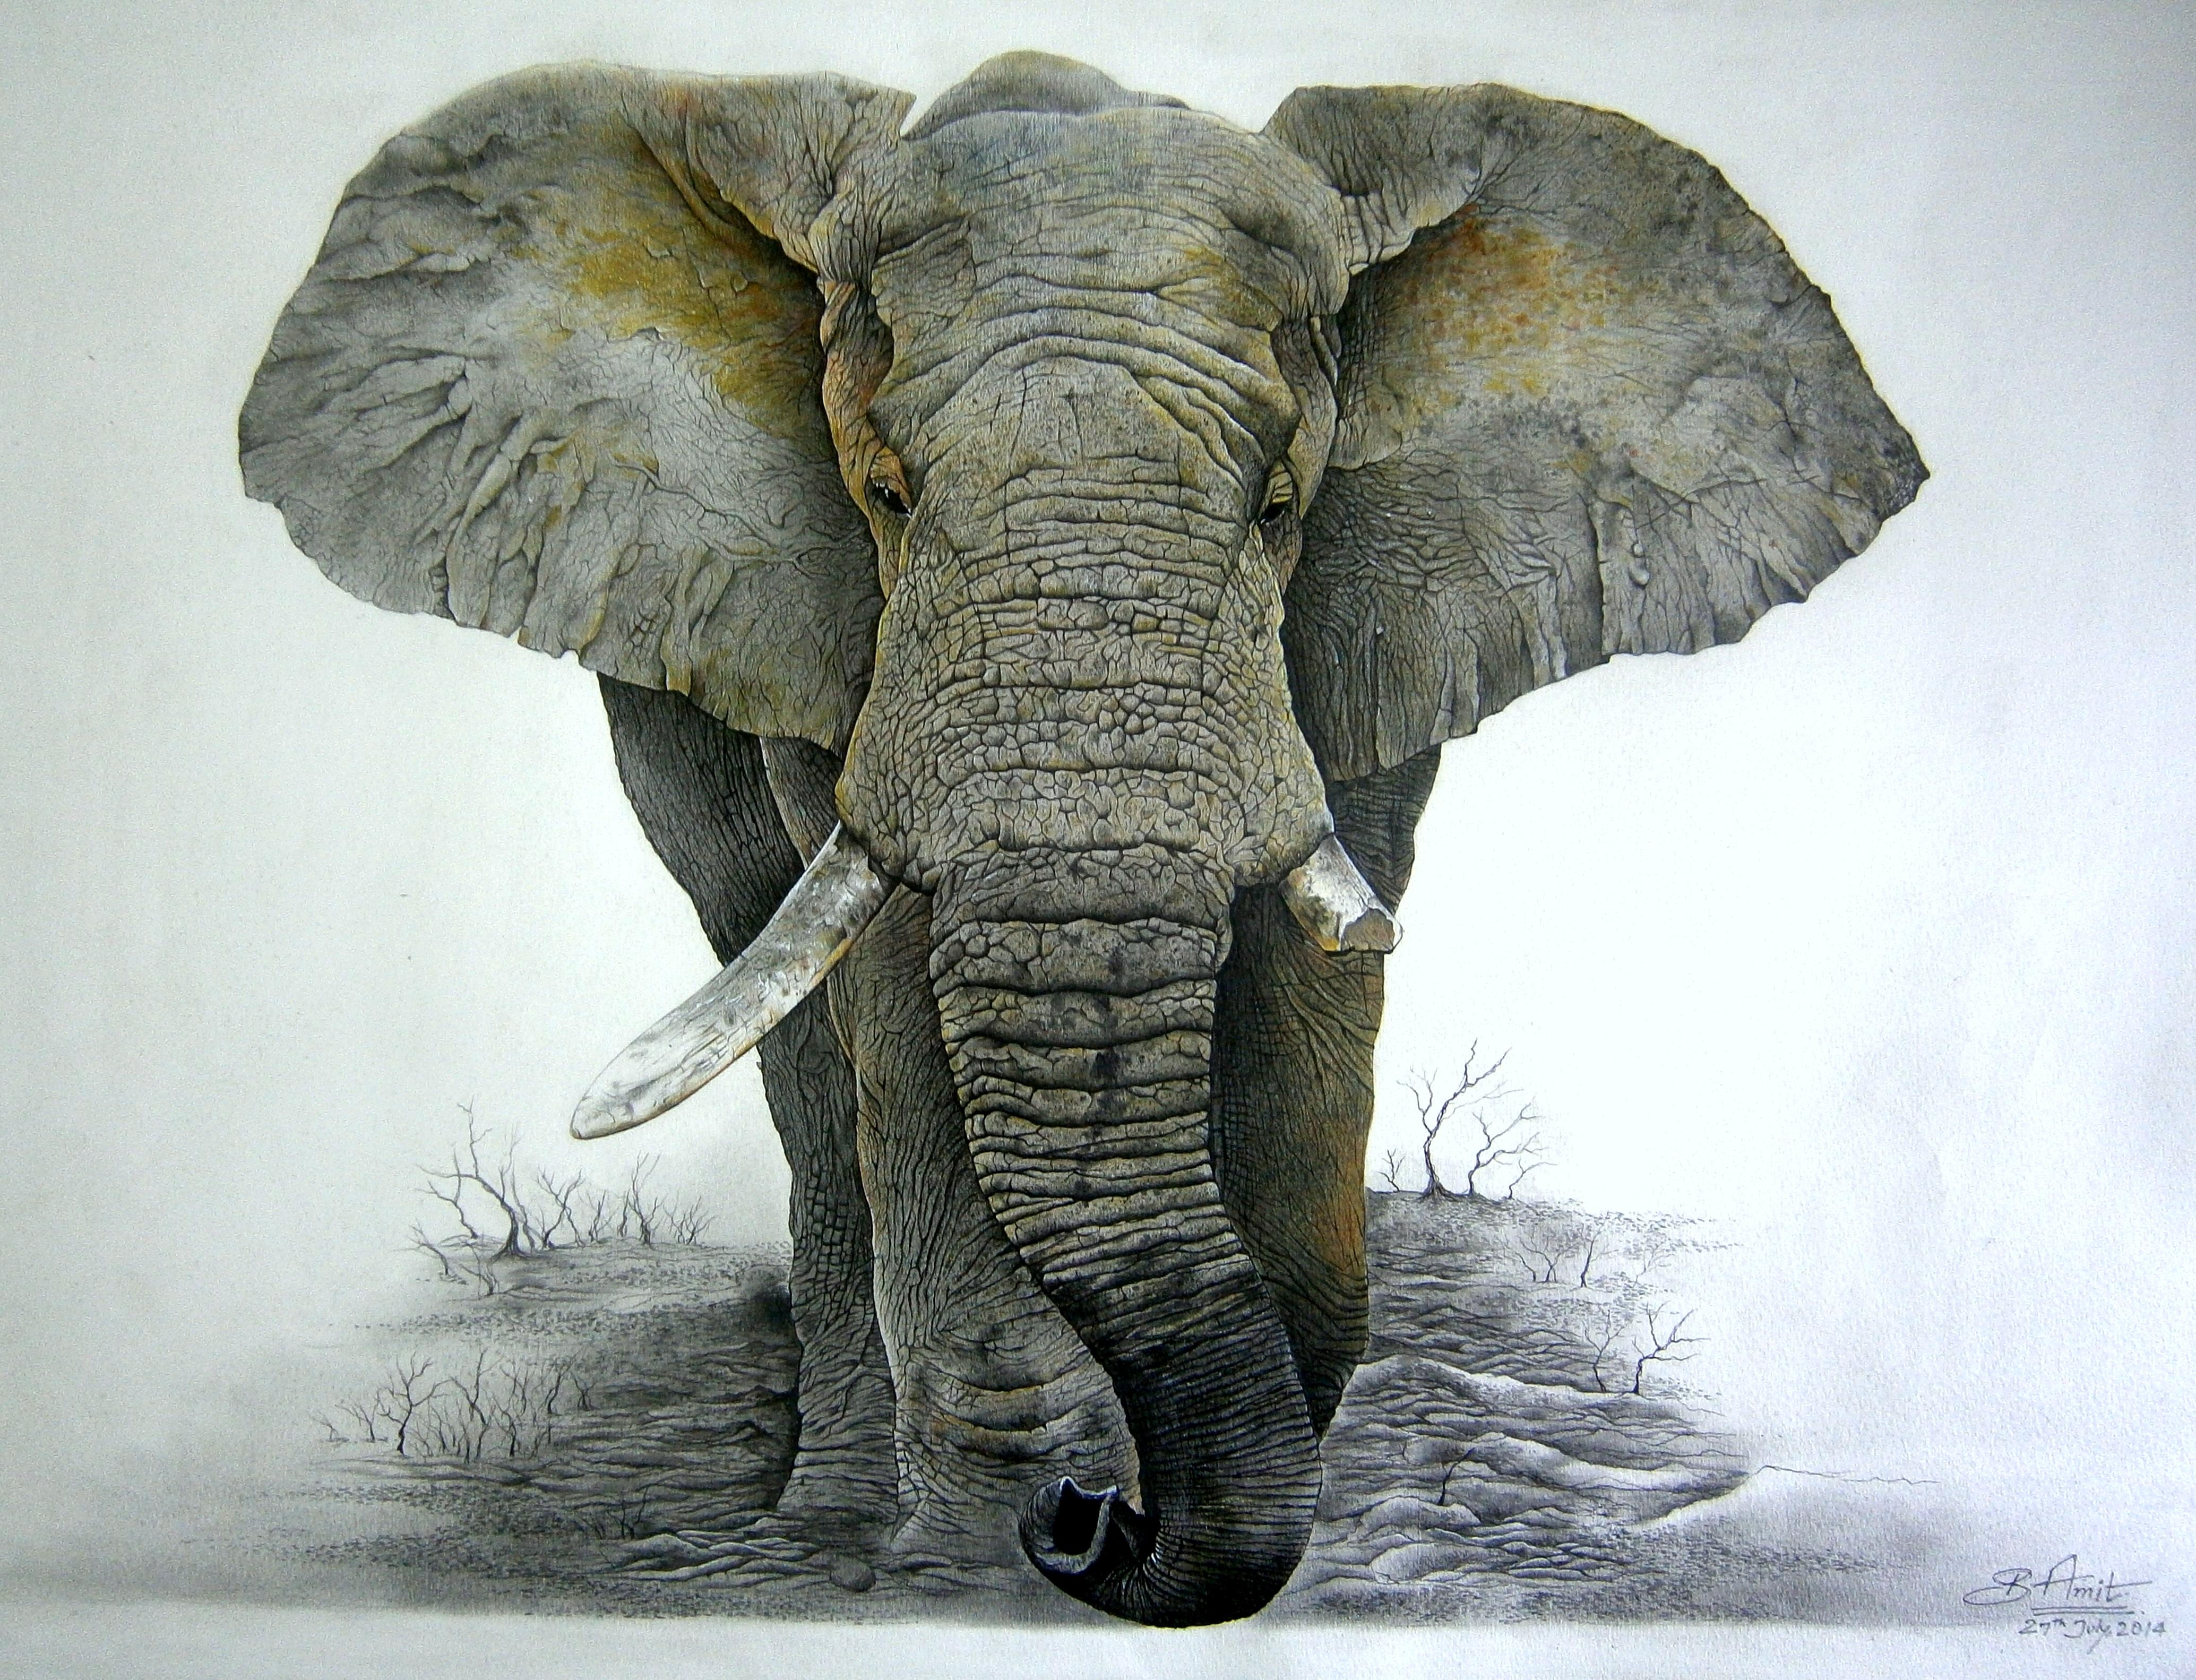 Gentle Giant, Pencils on canson paper, 33 x 47 inches. : Art